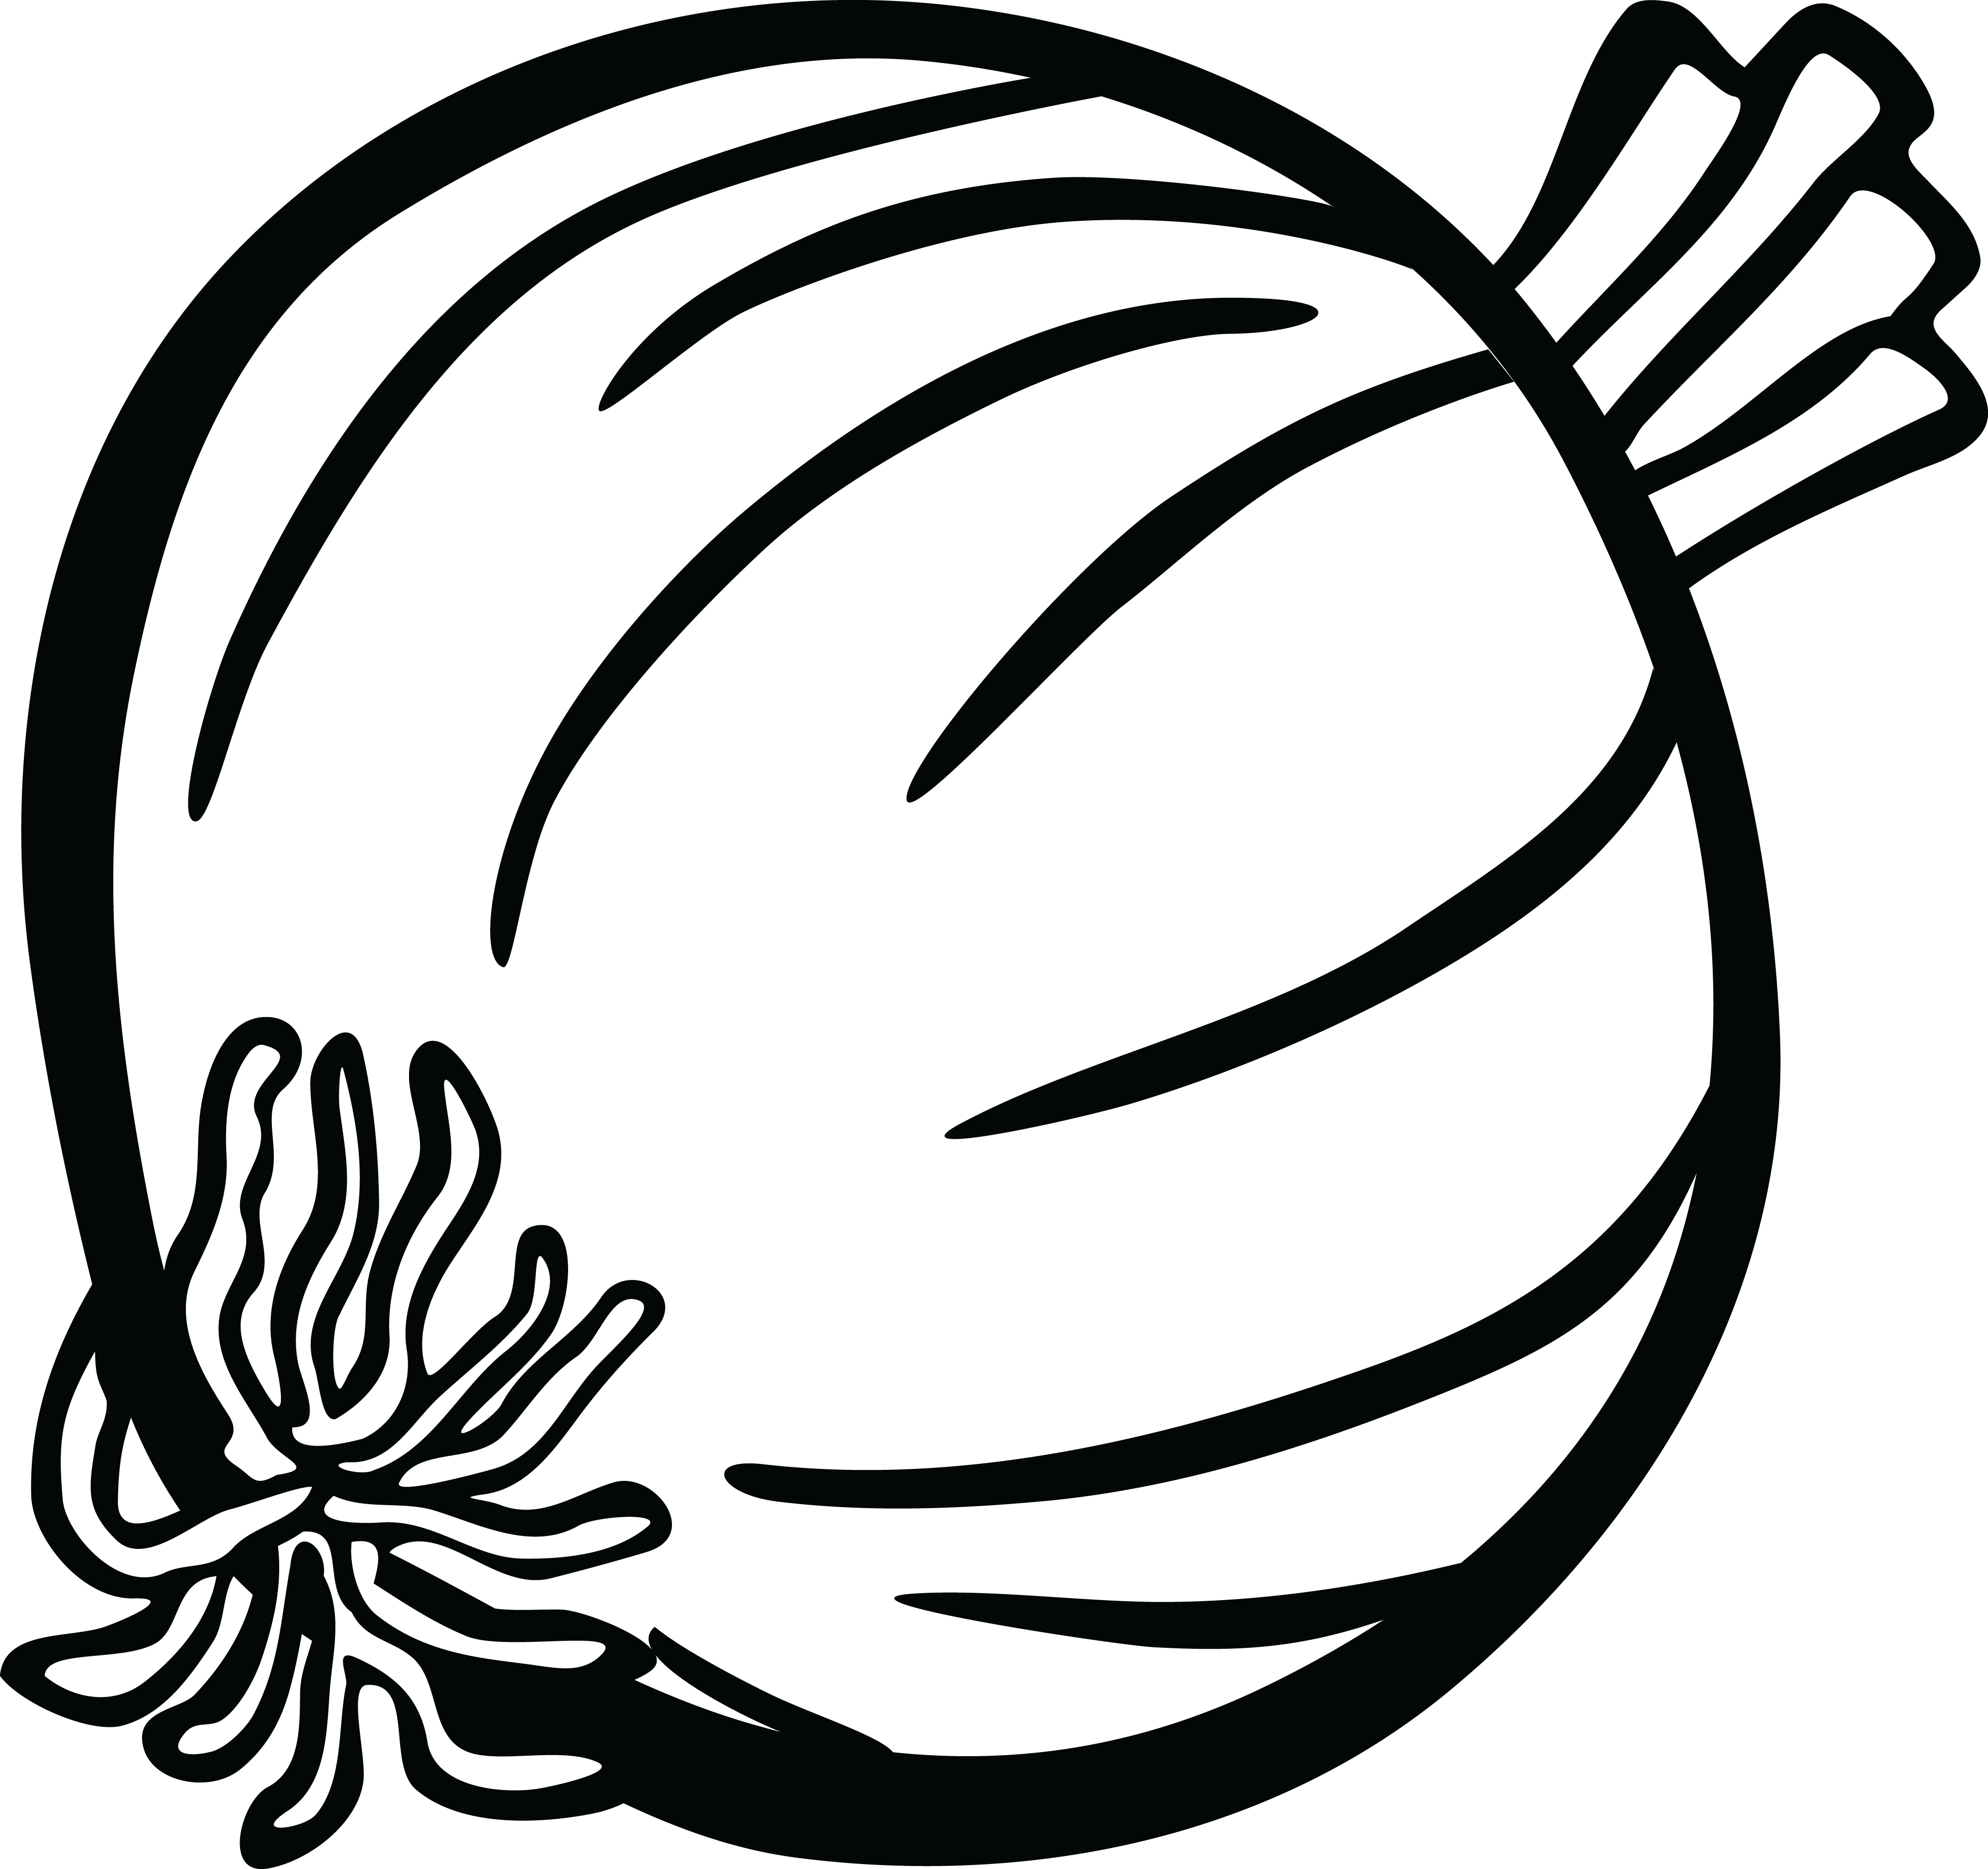 Free Clipart Of An onion #00011641 .